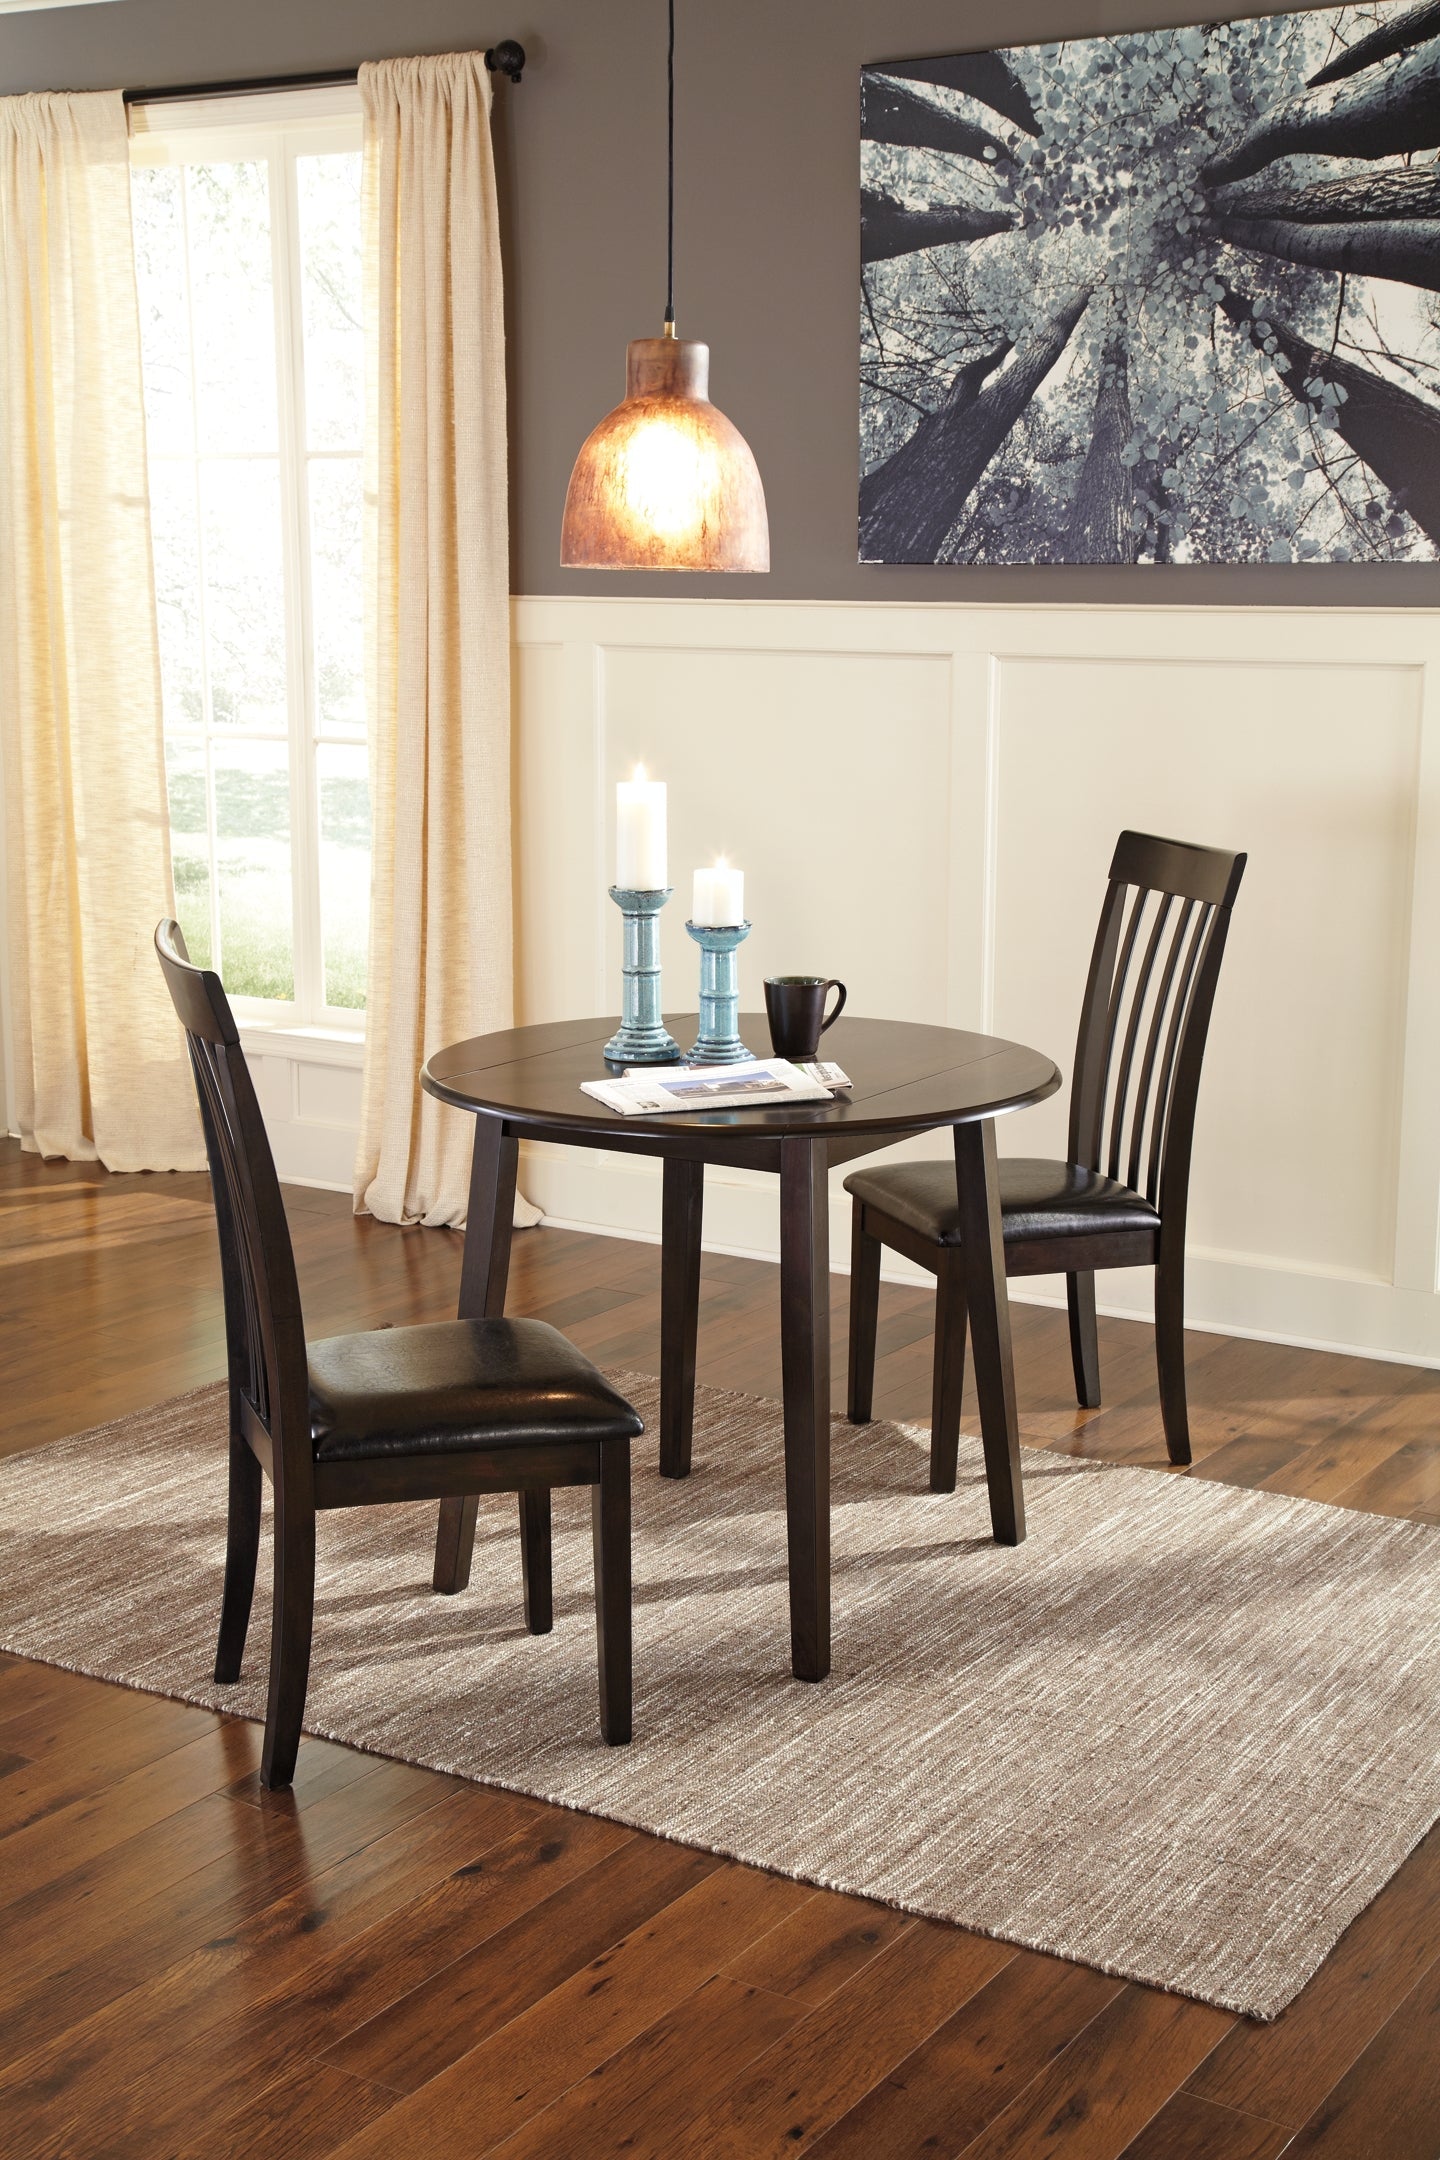 Hammis Dining Table and 2 Chairs at Walker Mattress and Furniture Locations in Cedar Park and Belton TX.